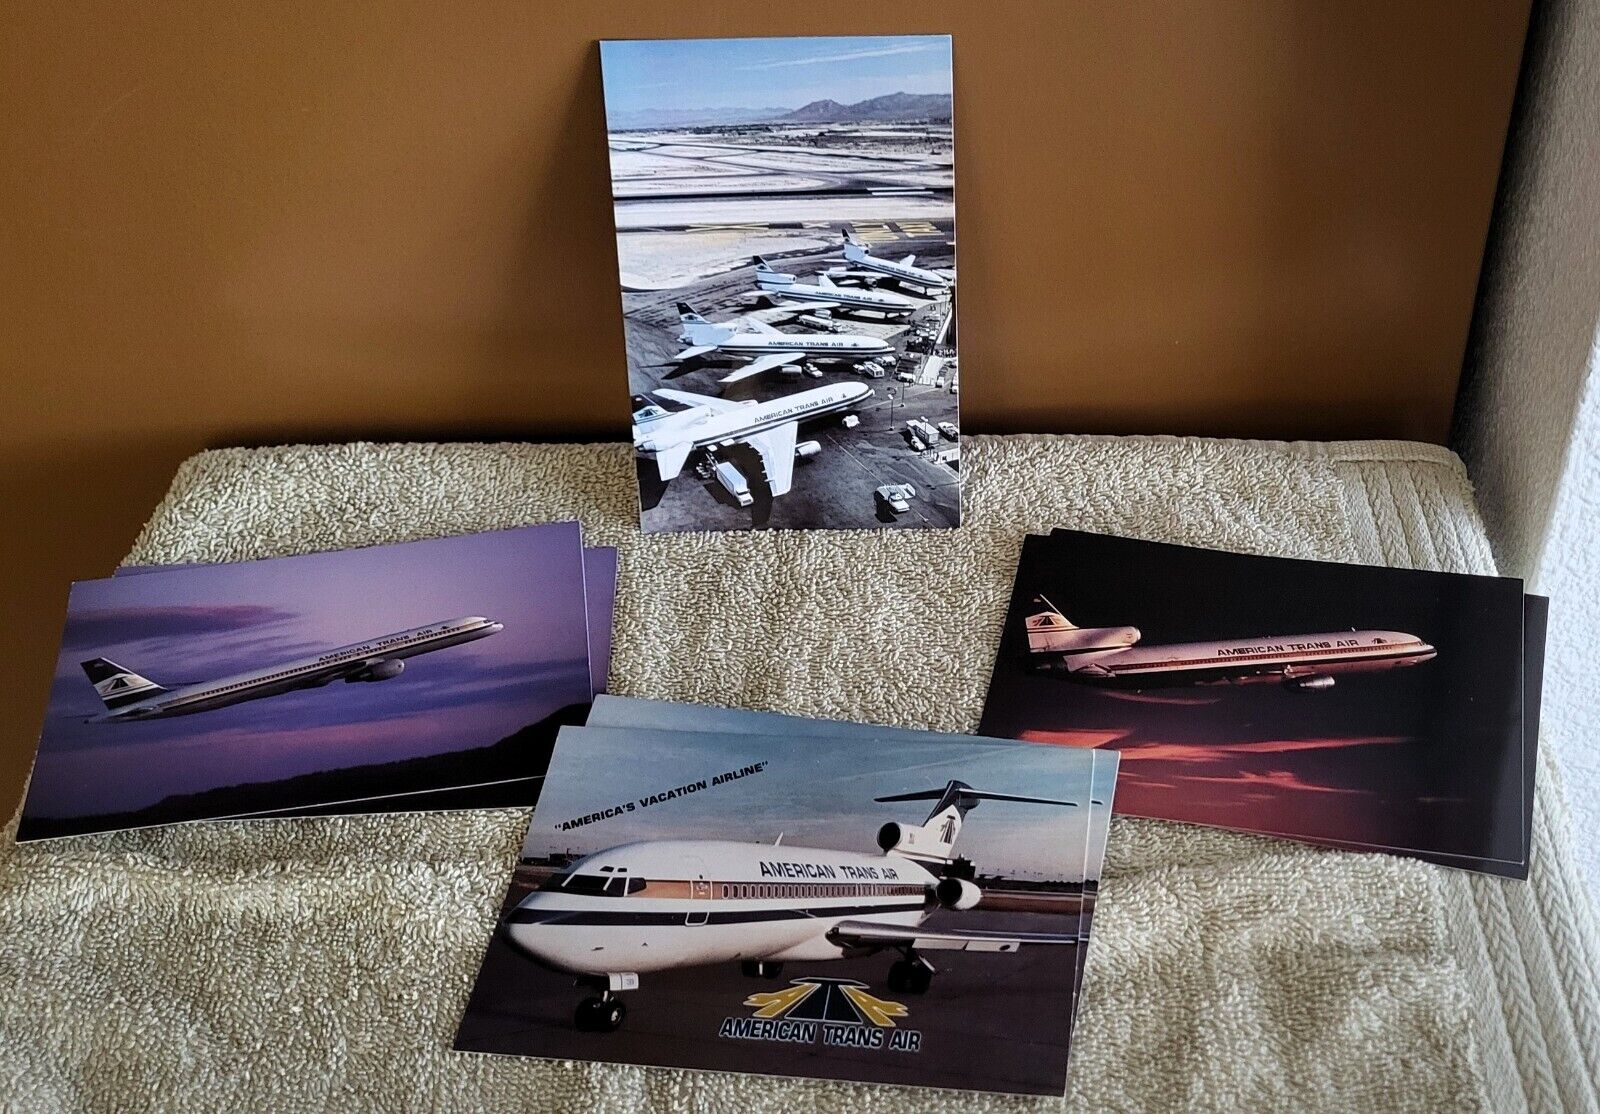 AMERICAN TRANS AIR (ATA) COLLECTIBLE POSTCARDS – Lot of 4 Different